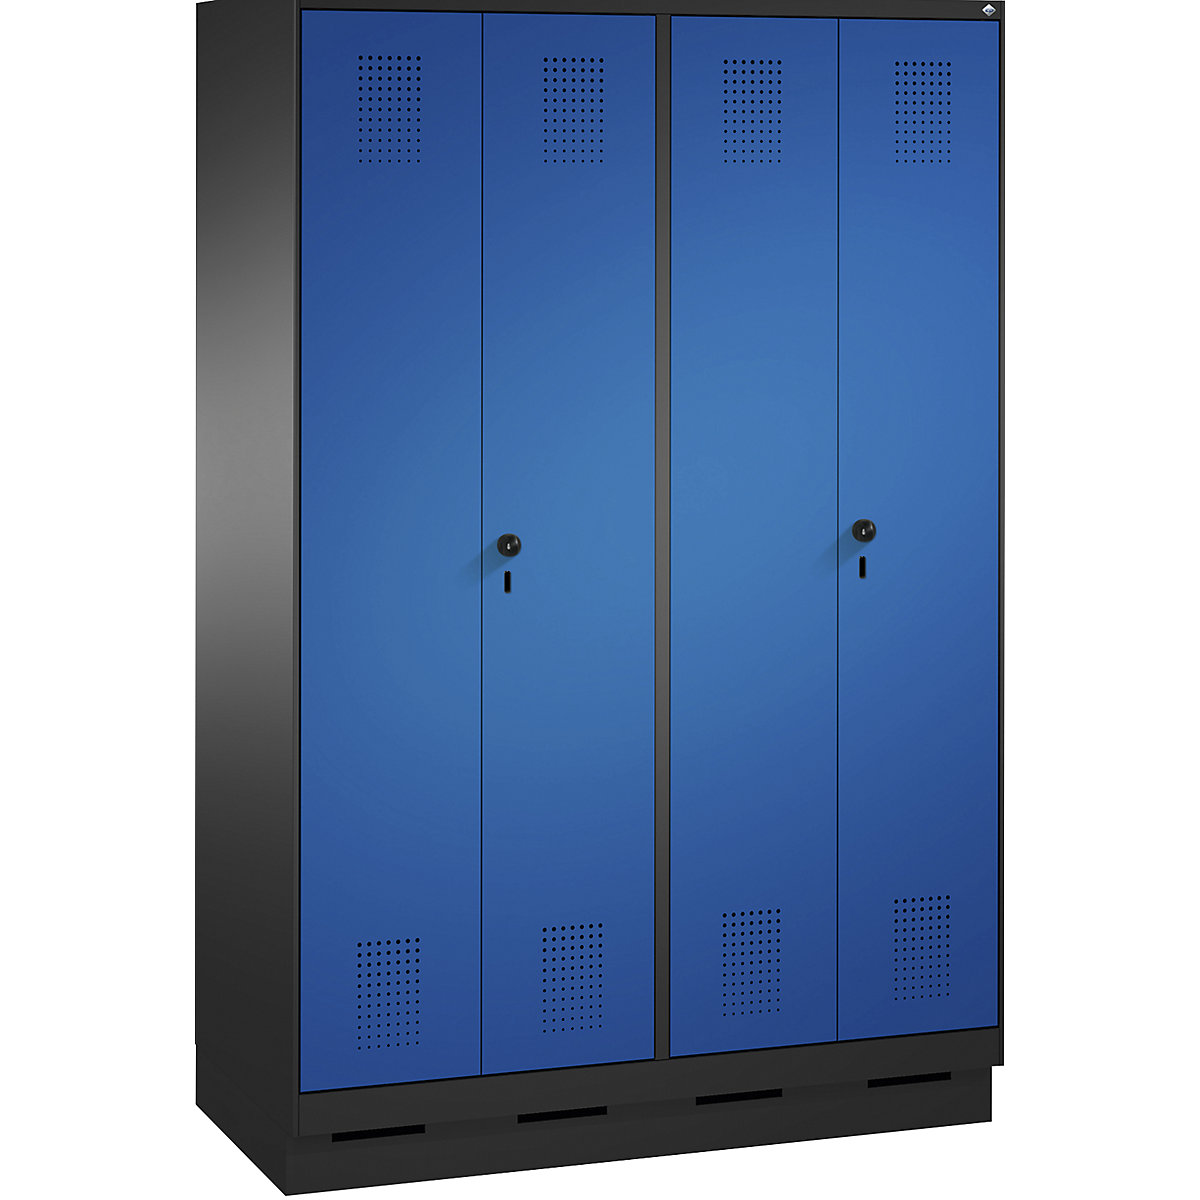 EVOLO cloakroom locker, doors close in the middle – C+P